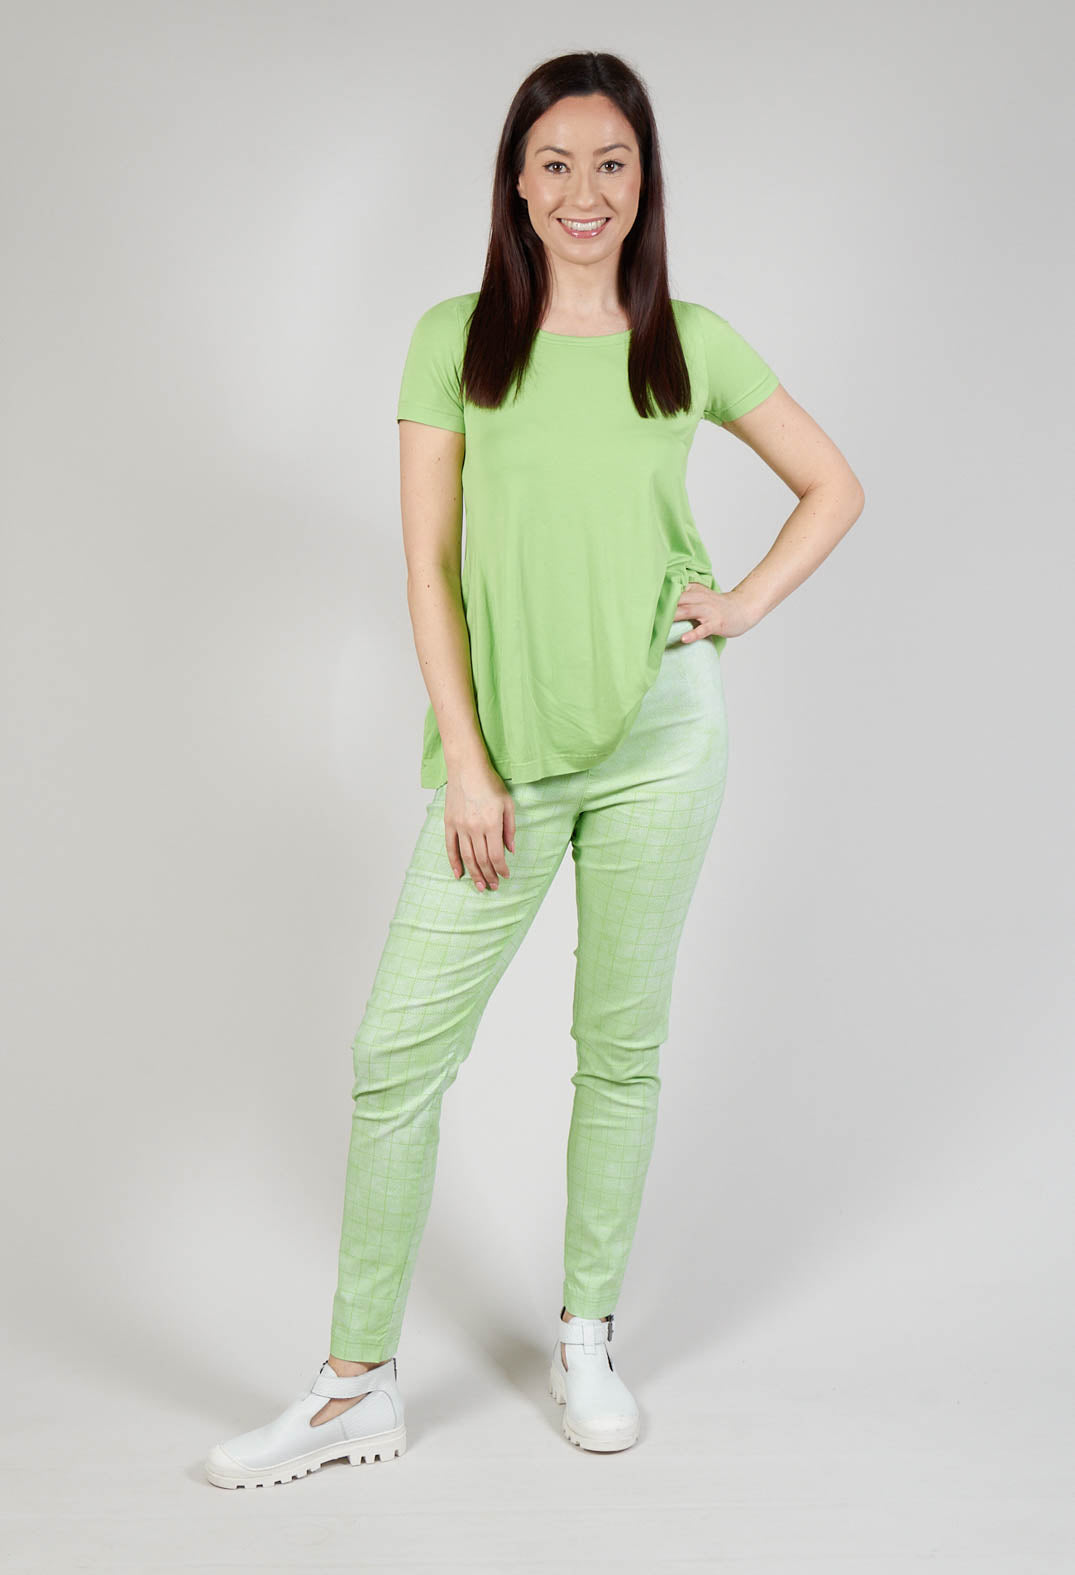 Pull On Slim Fit Trousers in Lime Print